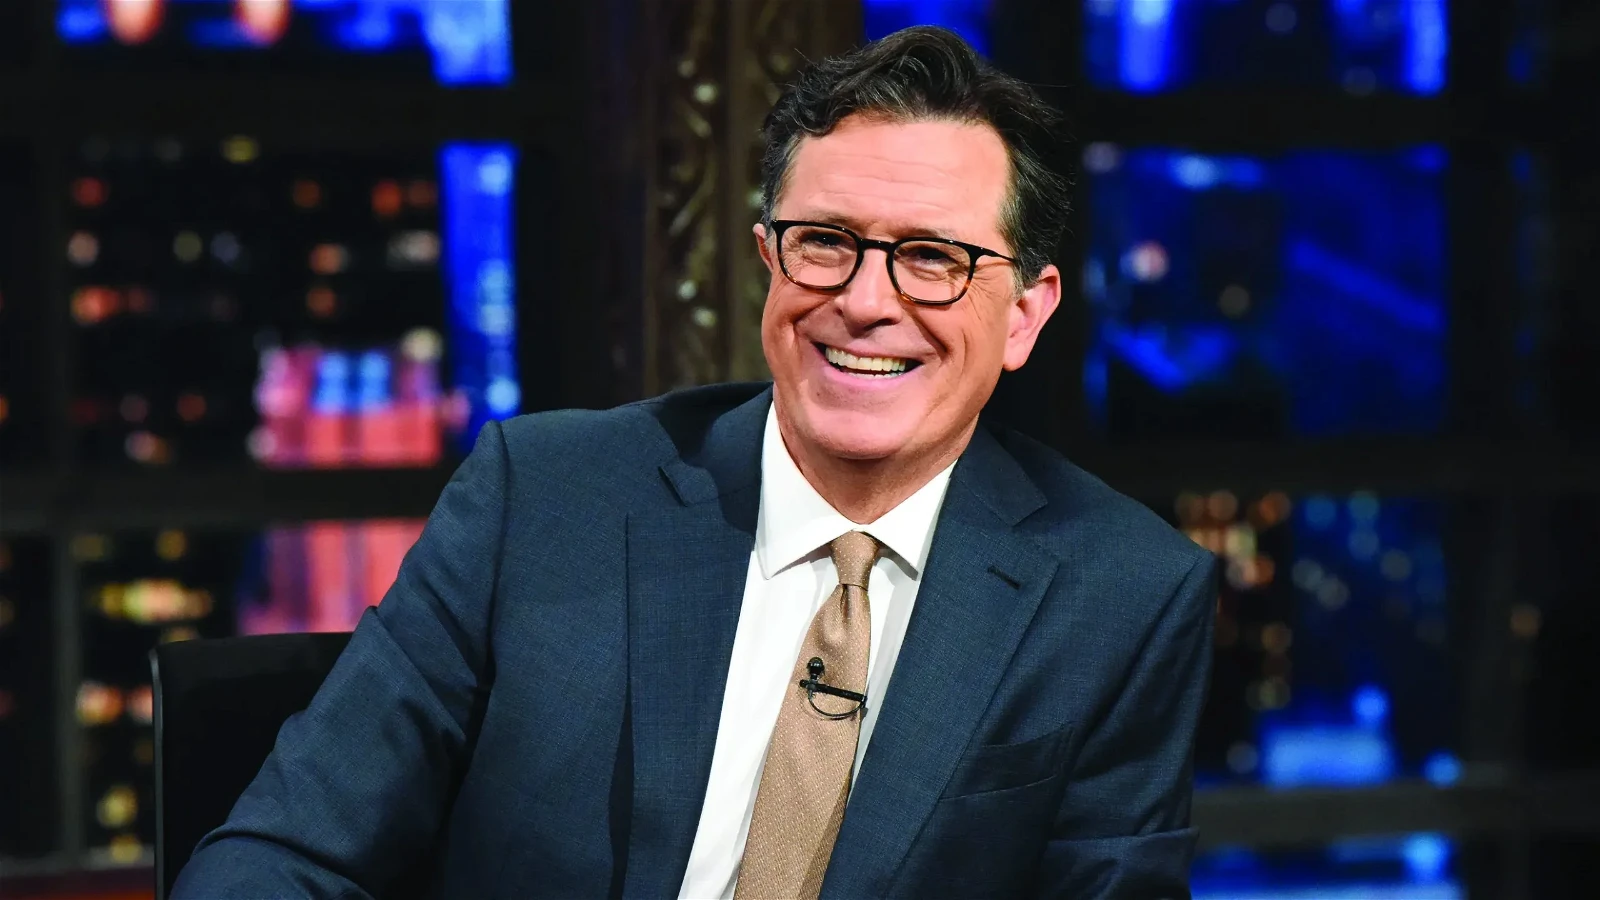 Stephen Colbert in The Late Show | Credits: CBS